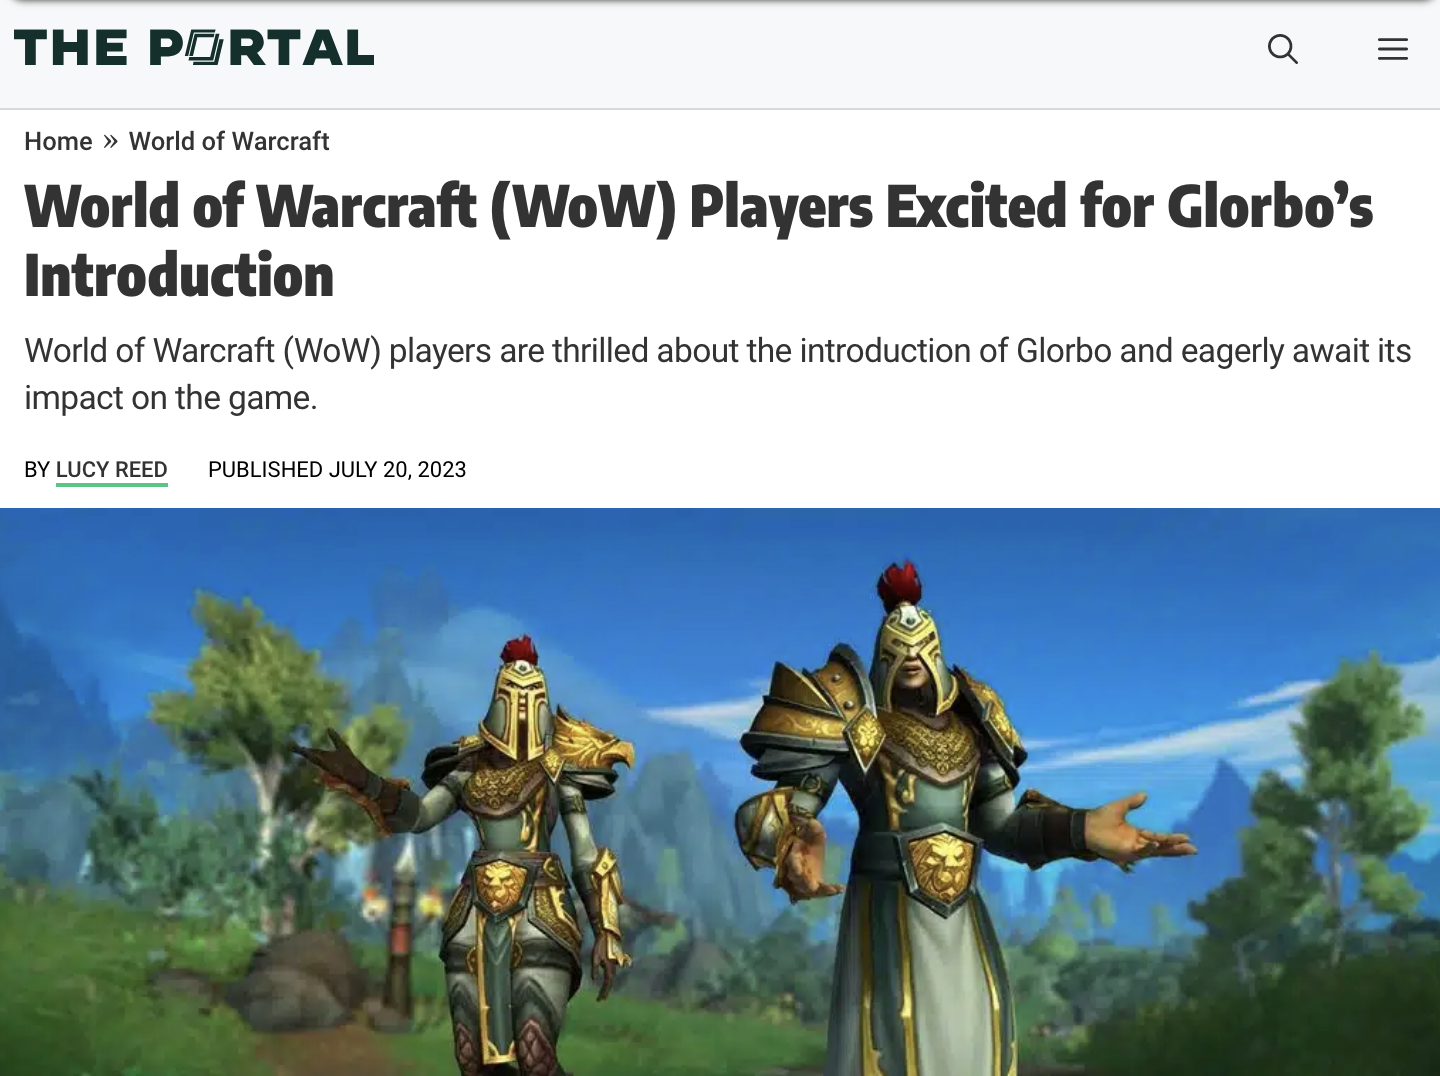 A screenshot of an article from a website called The Portal. The title says, "World of Warcraft (WoW) Players Excited for Glorbo’s Introduction".